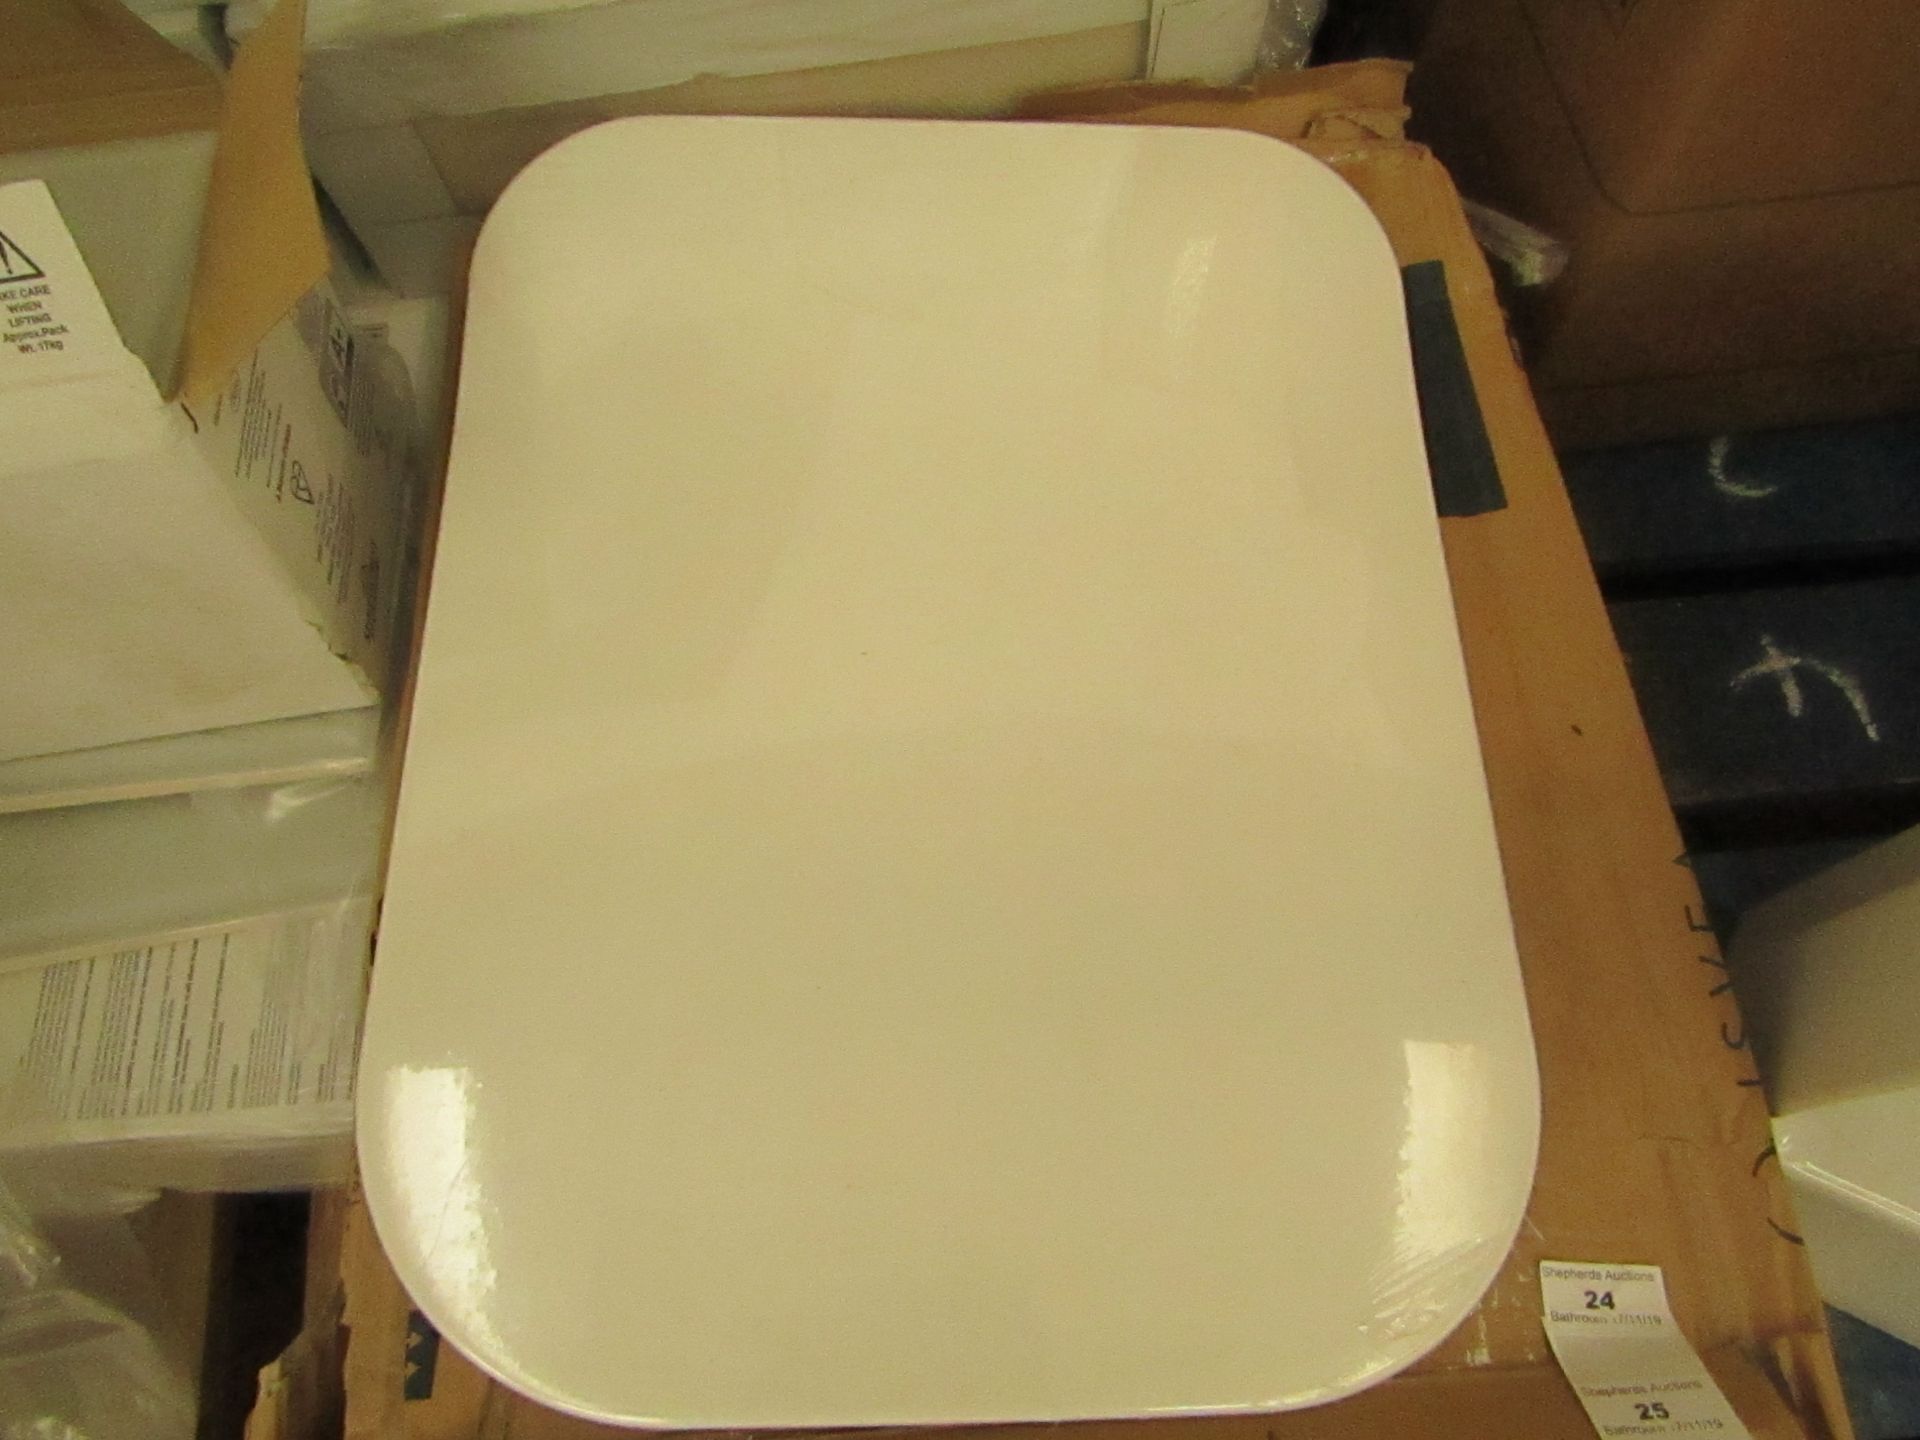 Isvea toilet seat and cover, new and boxed.